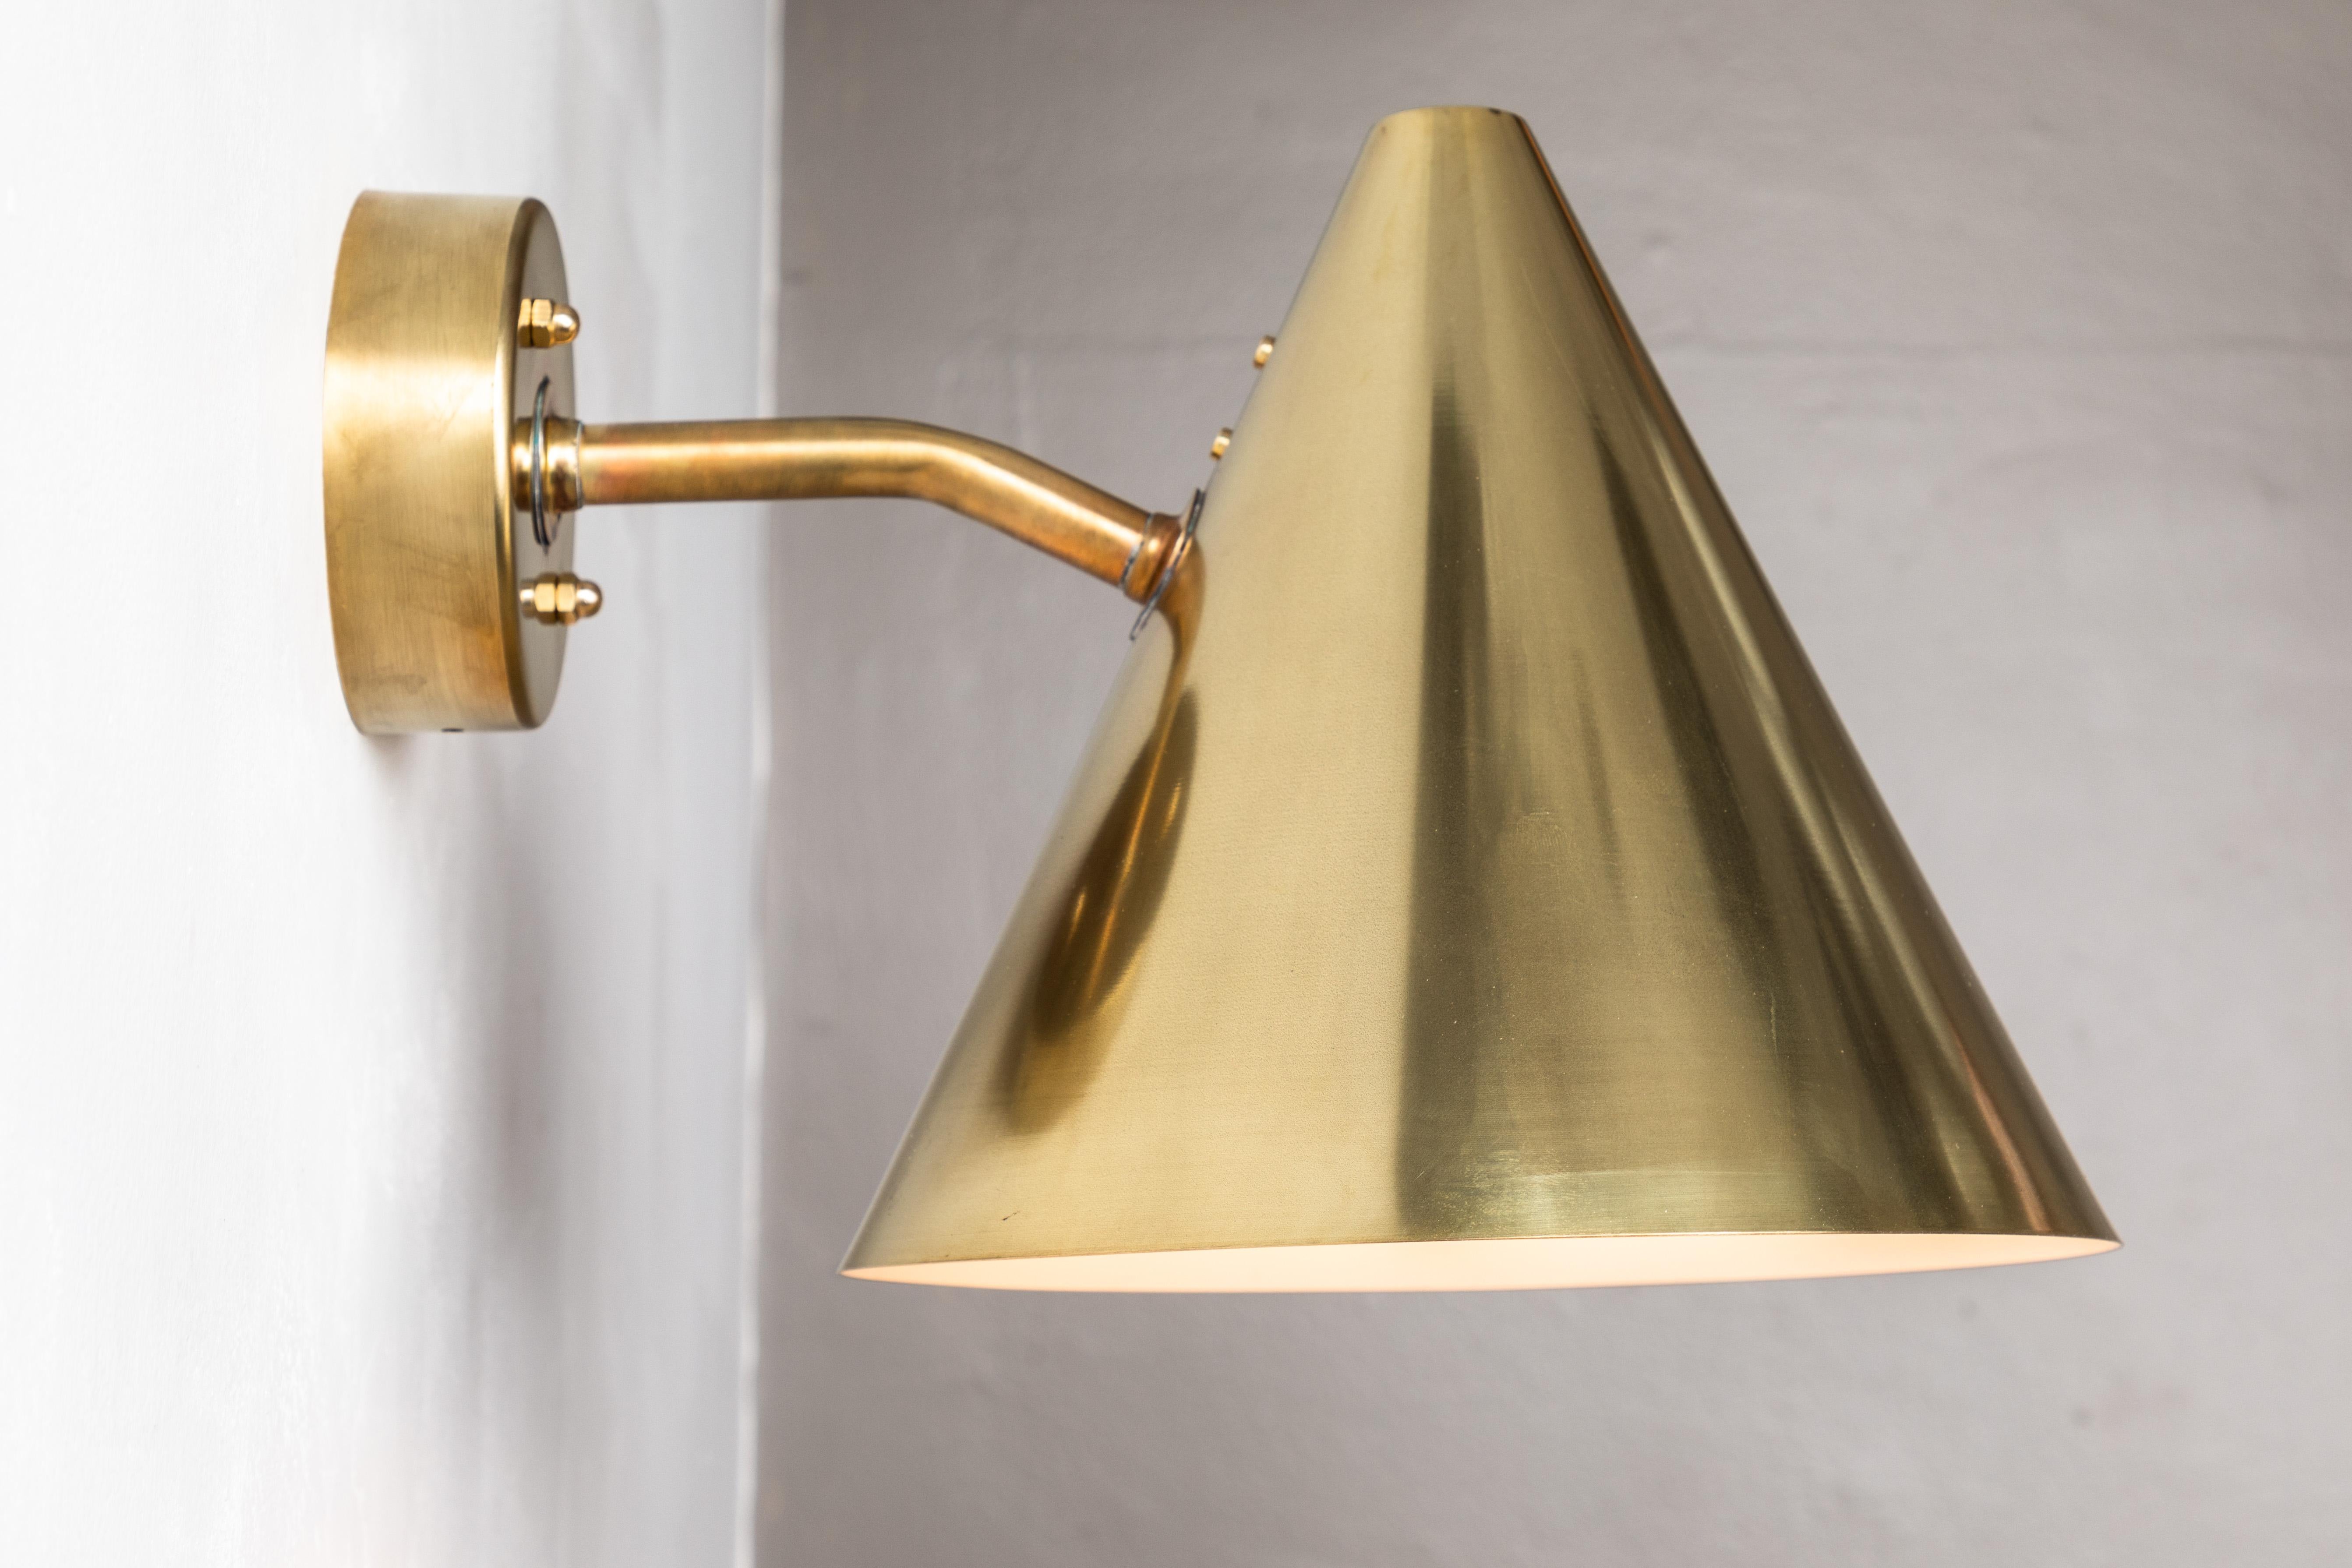 Pair of Hans-Agne Jakobsson 'Tratten' Raw Brass Outdoor Sconces In New Condition For Sale In Glendale, CA